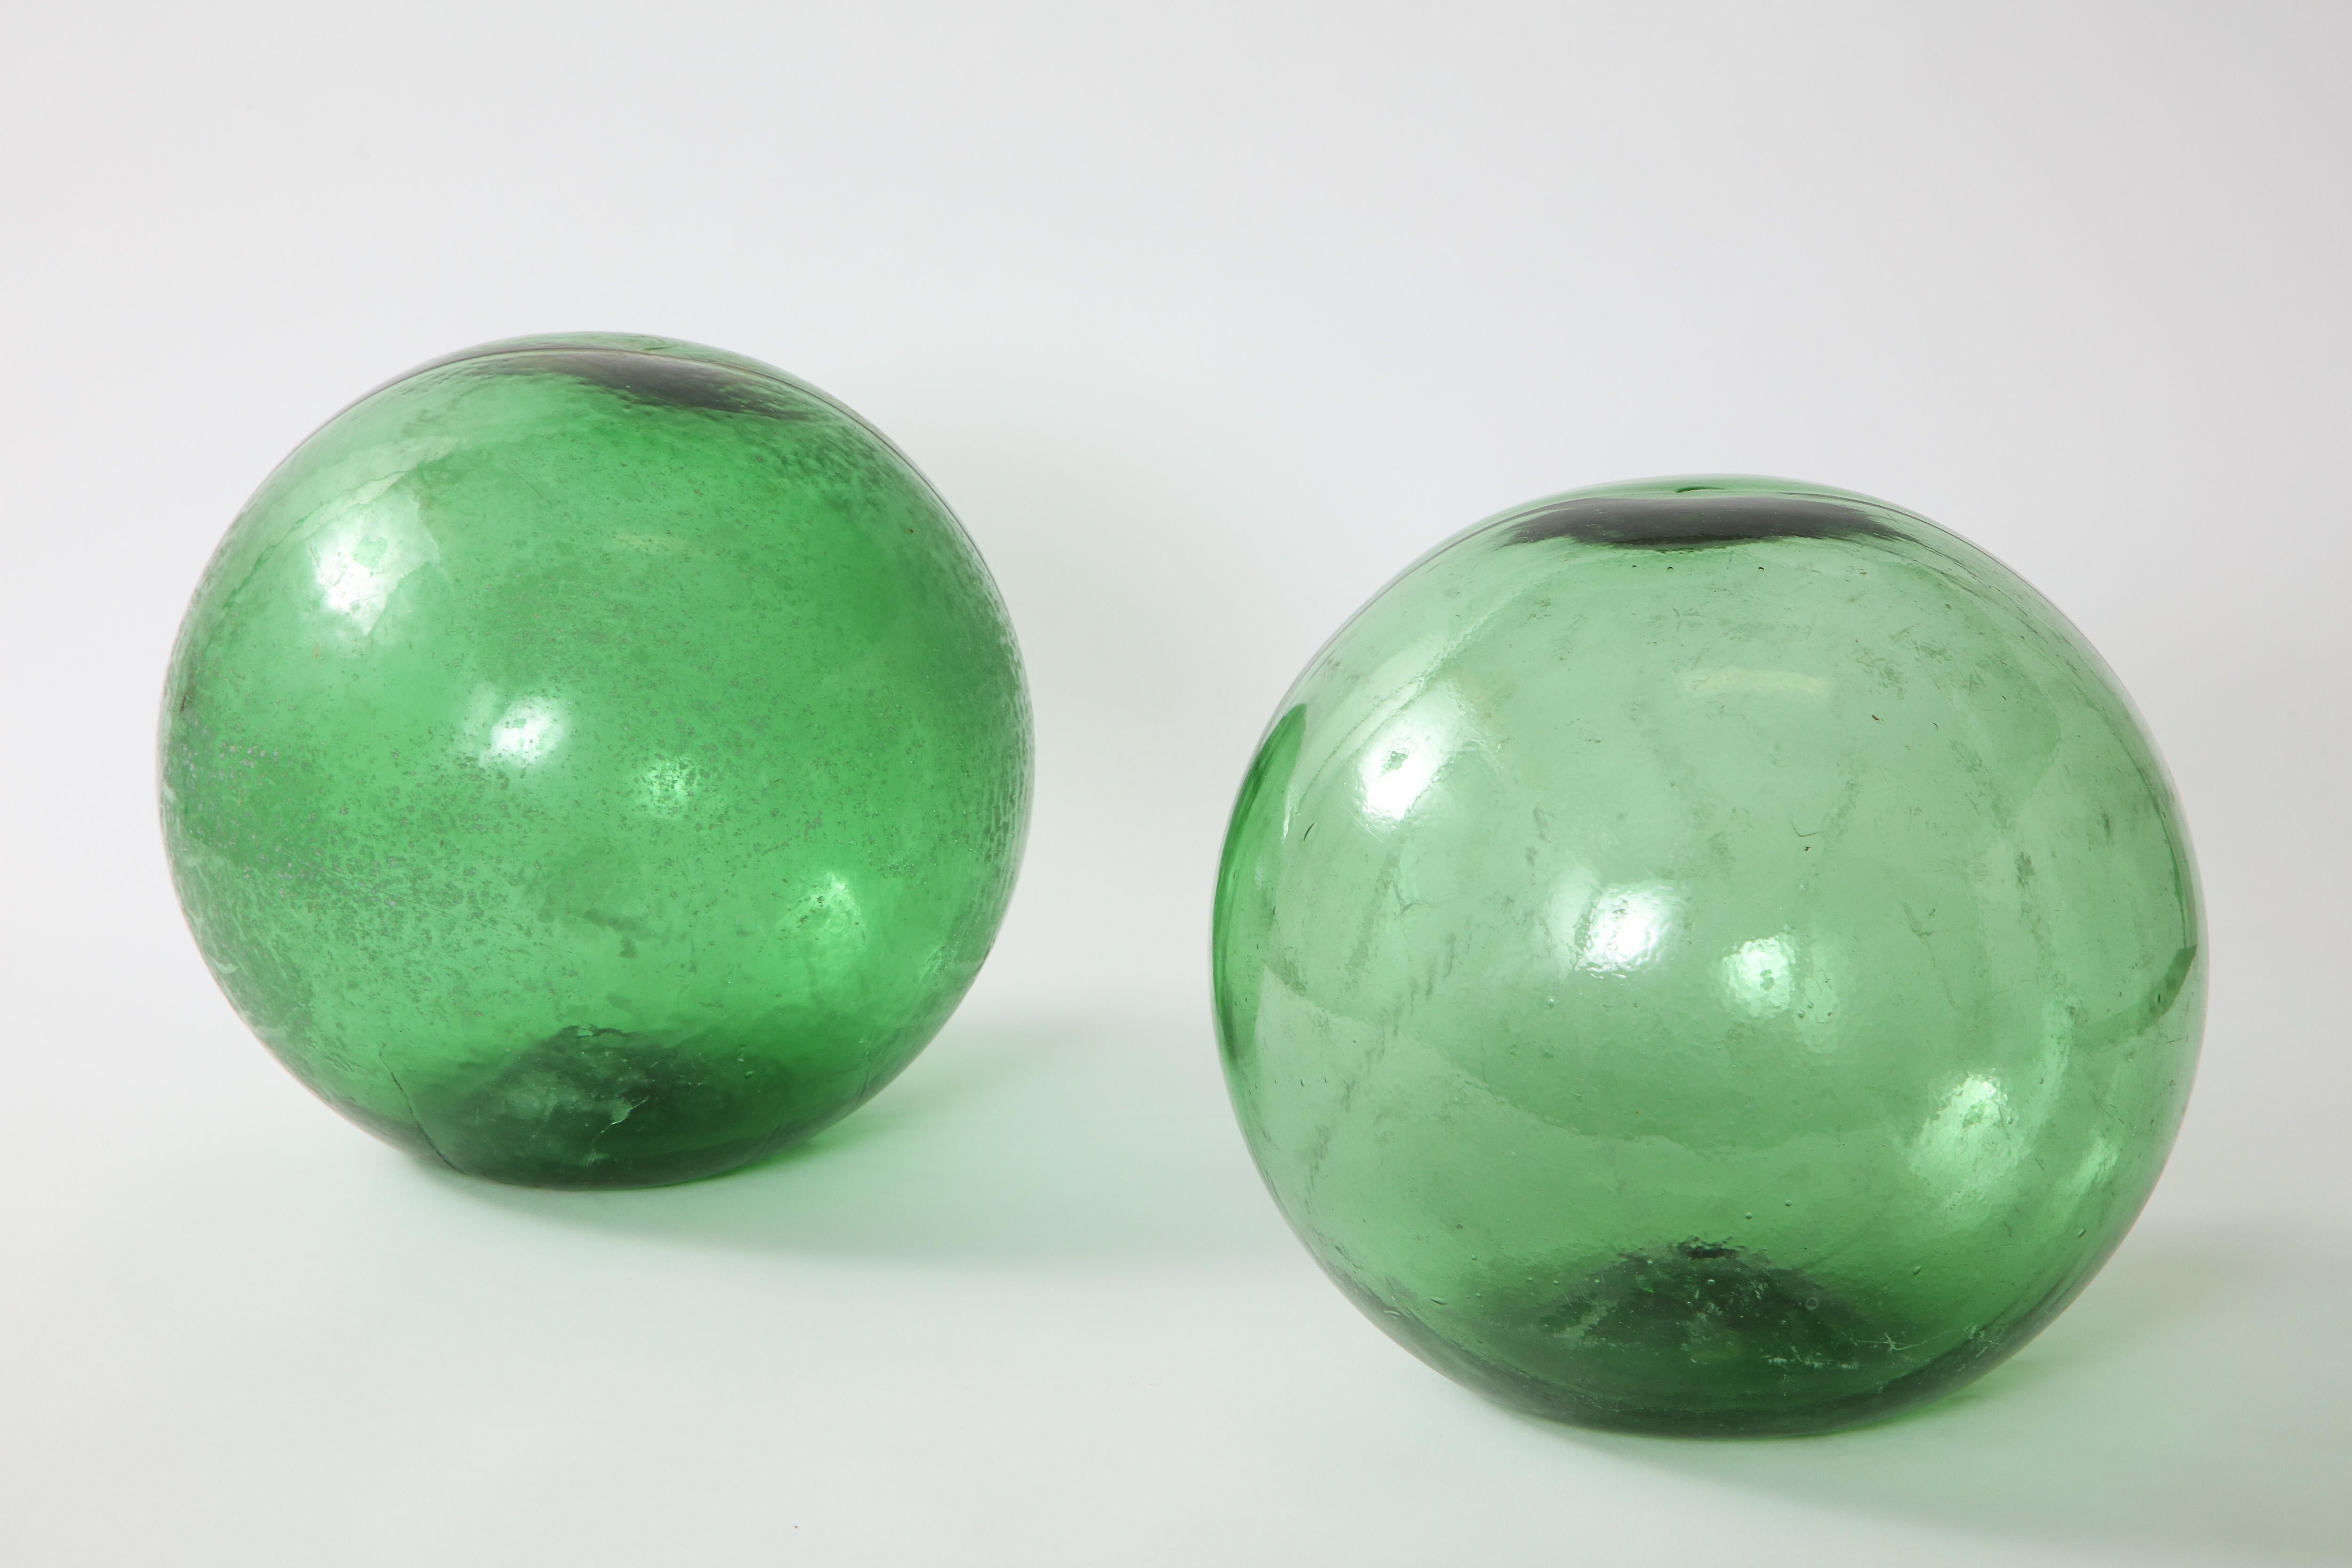 Pair of 19th century green hand blown glass orbs from England.